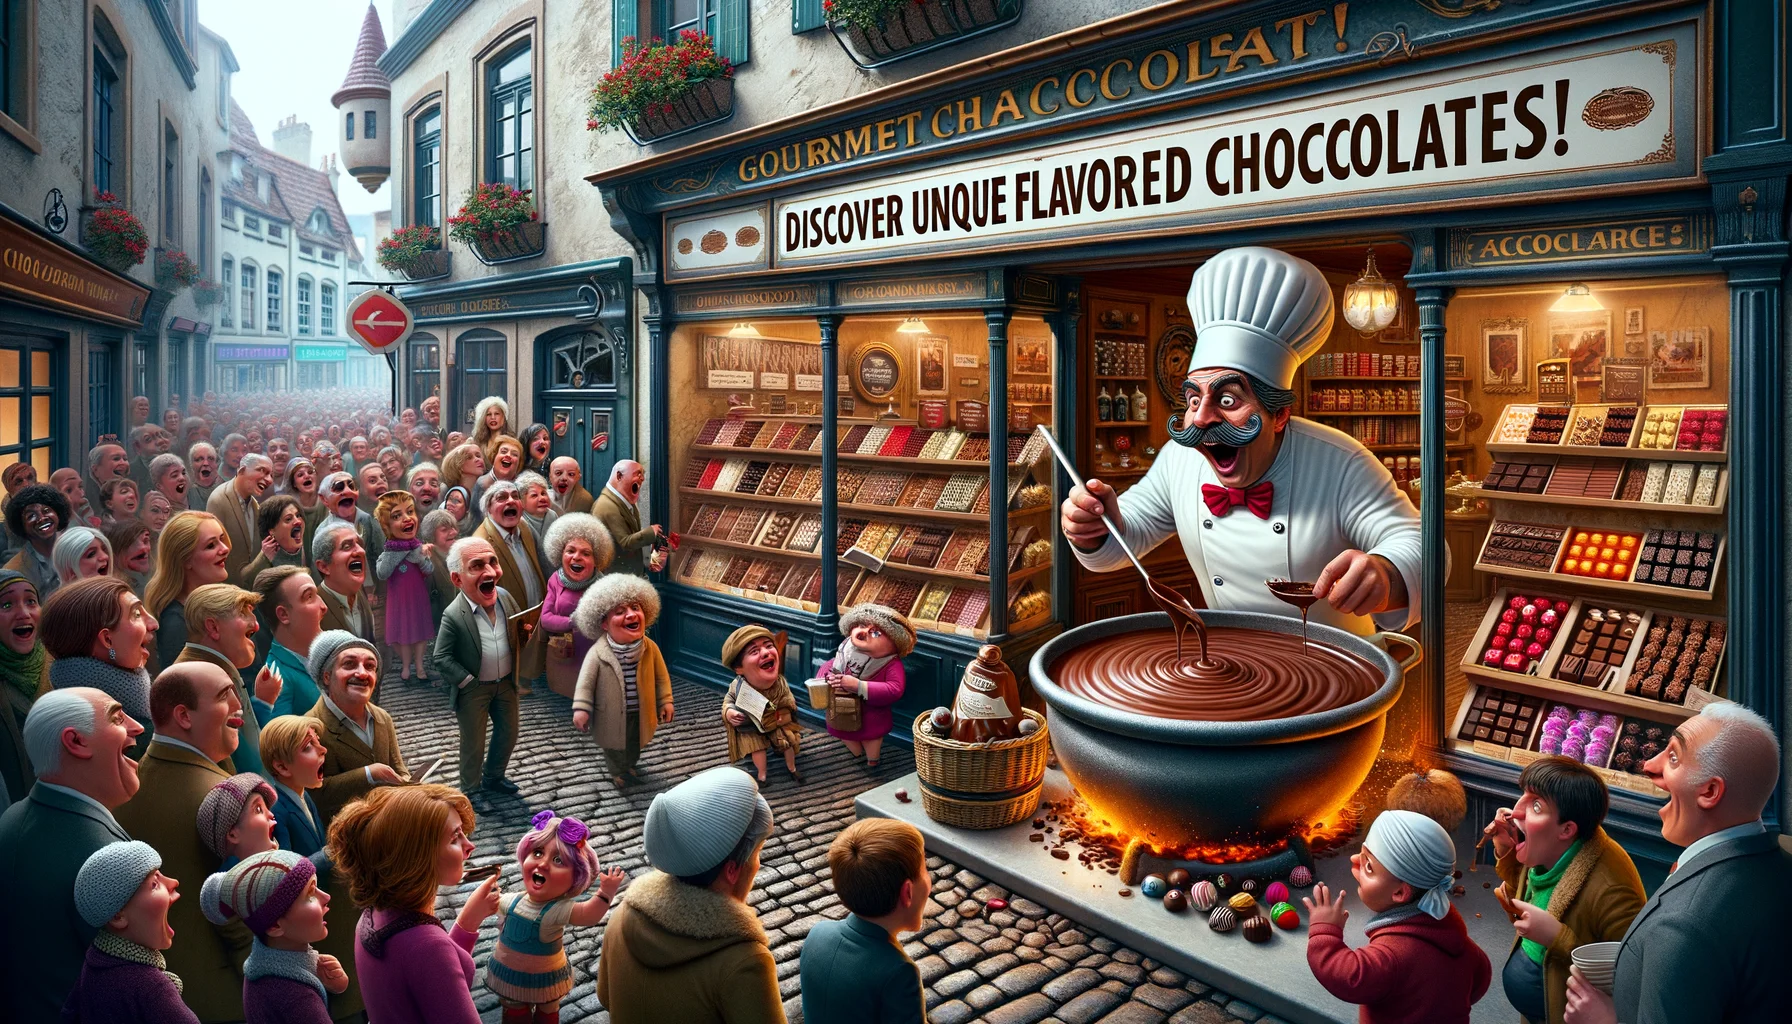 Imagine a humorously exaggerated gourmet chocolate shop nestled on a quaint cobblestone street. Inside, throngs of intrigued customers of all ages, genders, and descents are captivated by the delectable array of unique flavored chocolates, presented gracefully in lavish displays. In the background, a flamboyant chocolatier with a signature curled mustache, wearing a pearly white chef uniform, is busily stirring a big molten vat of chocolate with a dash of the mysterious ingredient that is making these chocolates so uniquely delightful. The atmosphere is bustling yet inviting, filled with whimsical charm, and an inviting sign in bold lettering reads 'Discover Unique Flavored Chocolates!'.